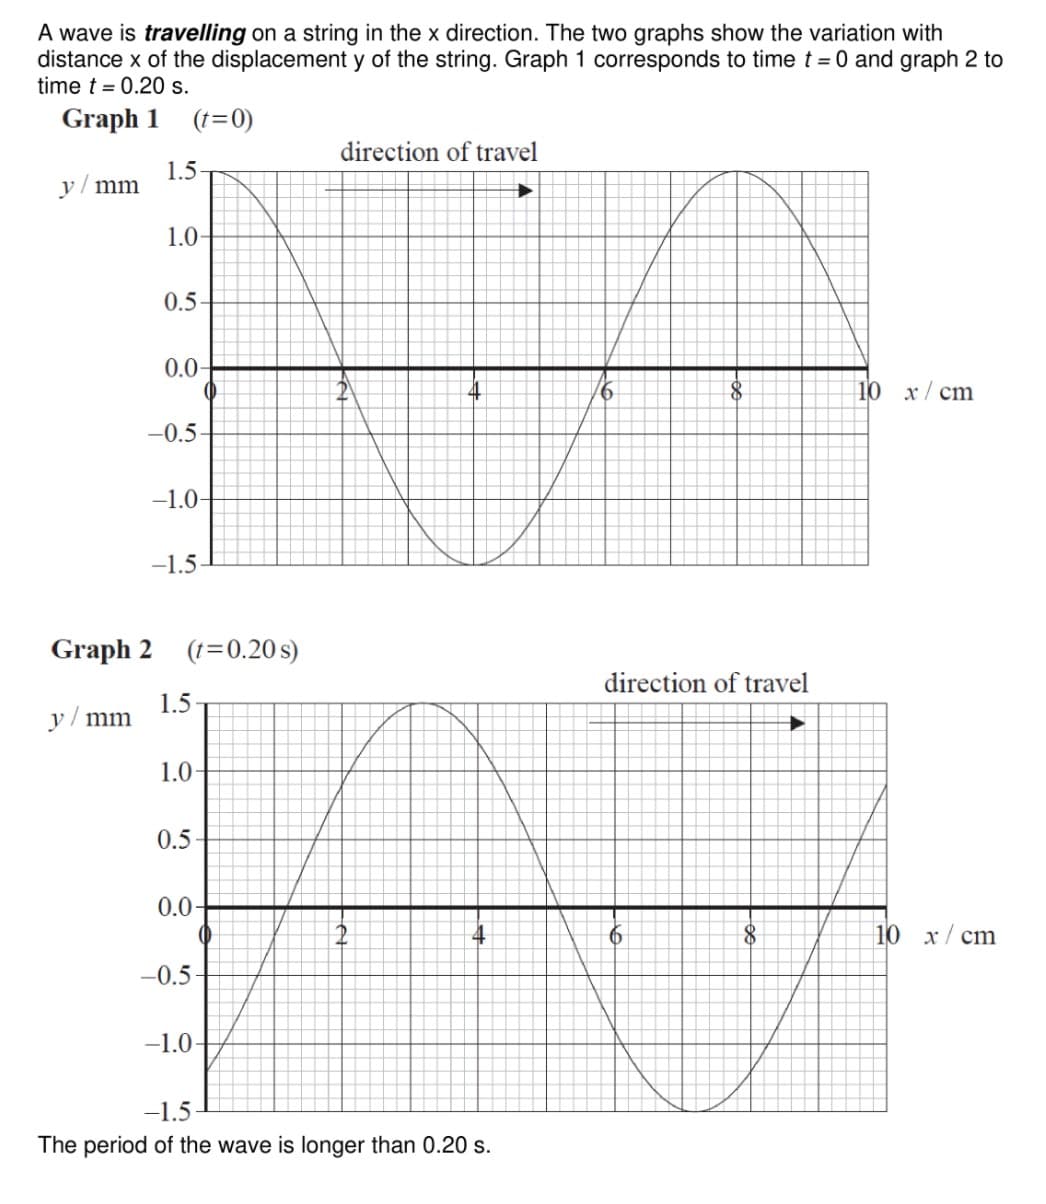 A wave is travelling on a string in the x direction. The two graphs show the variation with
distance x of the displacement y of the string. Graph 1 corresponds to time t =0 and graph 2 to
time t = 0.20 s.
Graph 1 (t=0)
direction of travel
1.5
y/ mm
1.0-
0.5-
0.0
10 x/ cm
-0.5
-1.0-
-1.5
Graph 2
(t=0.20 s)
direction of travel
1.5
y/ mm
1.0-
0.5
0.0-
10 x/ cm
-0.5
-1.0-
-1.5
The period of the wave is longer than 0.20 s.
